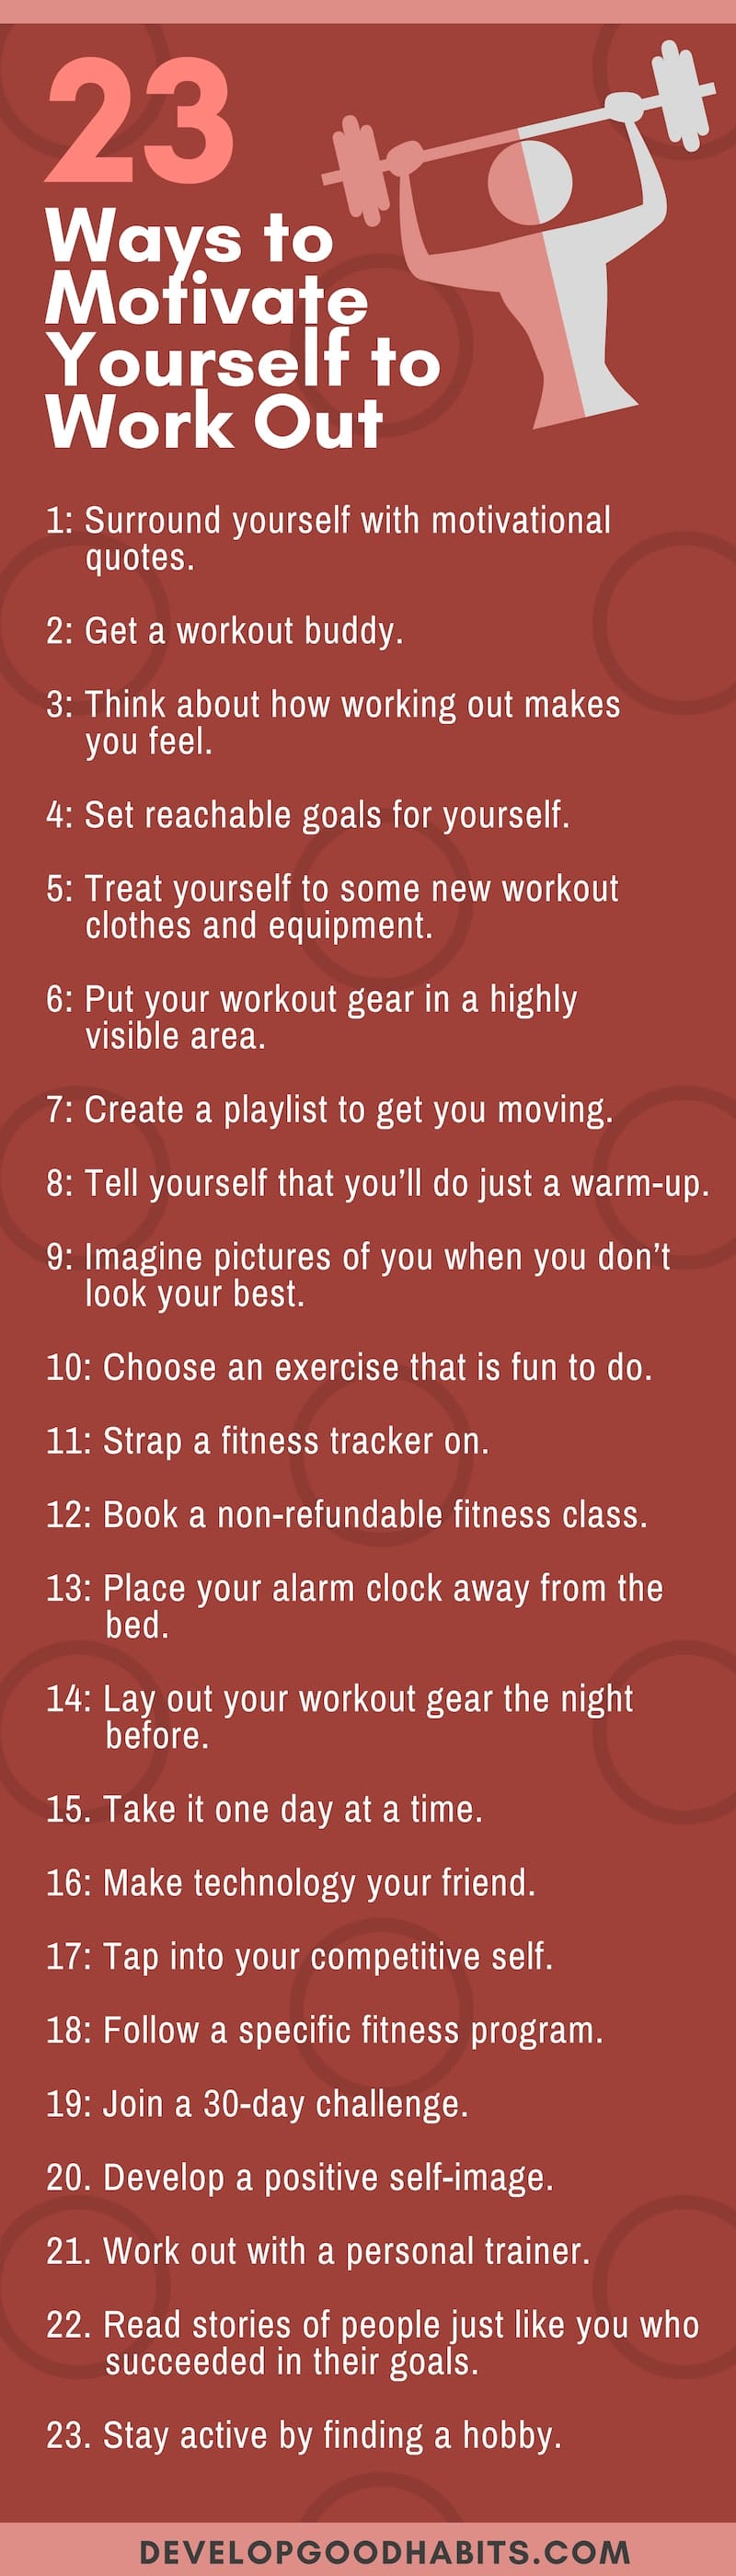 how to motivate yourself to workout | how to convince yourself to work out | #motivation #infographic #workout #fitness